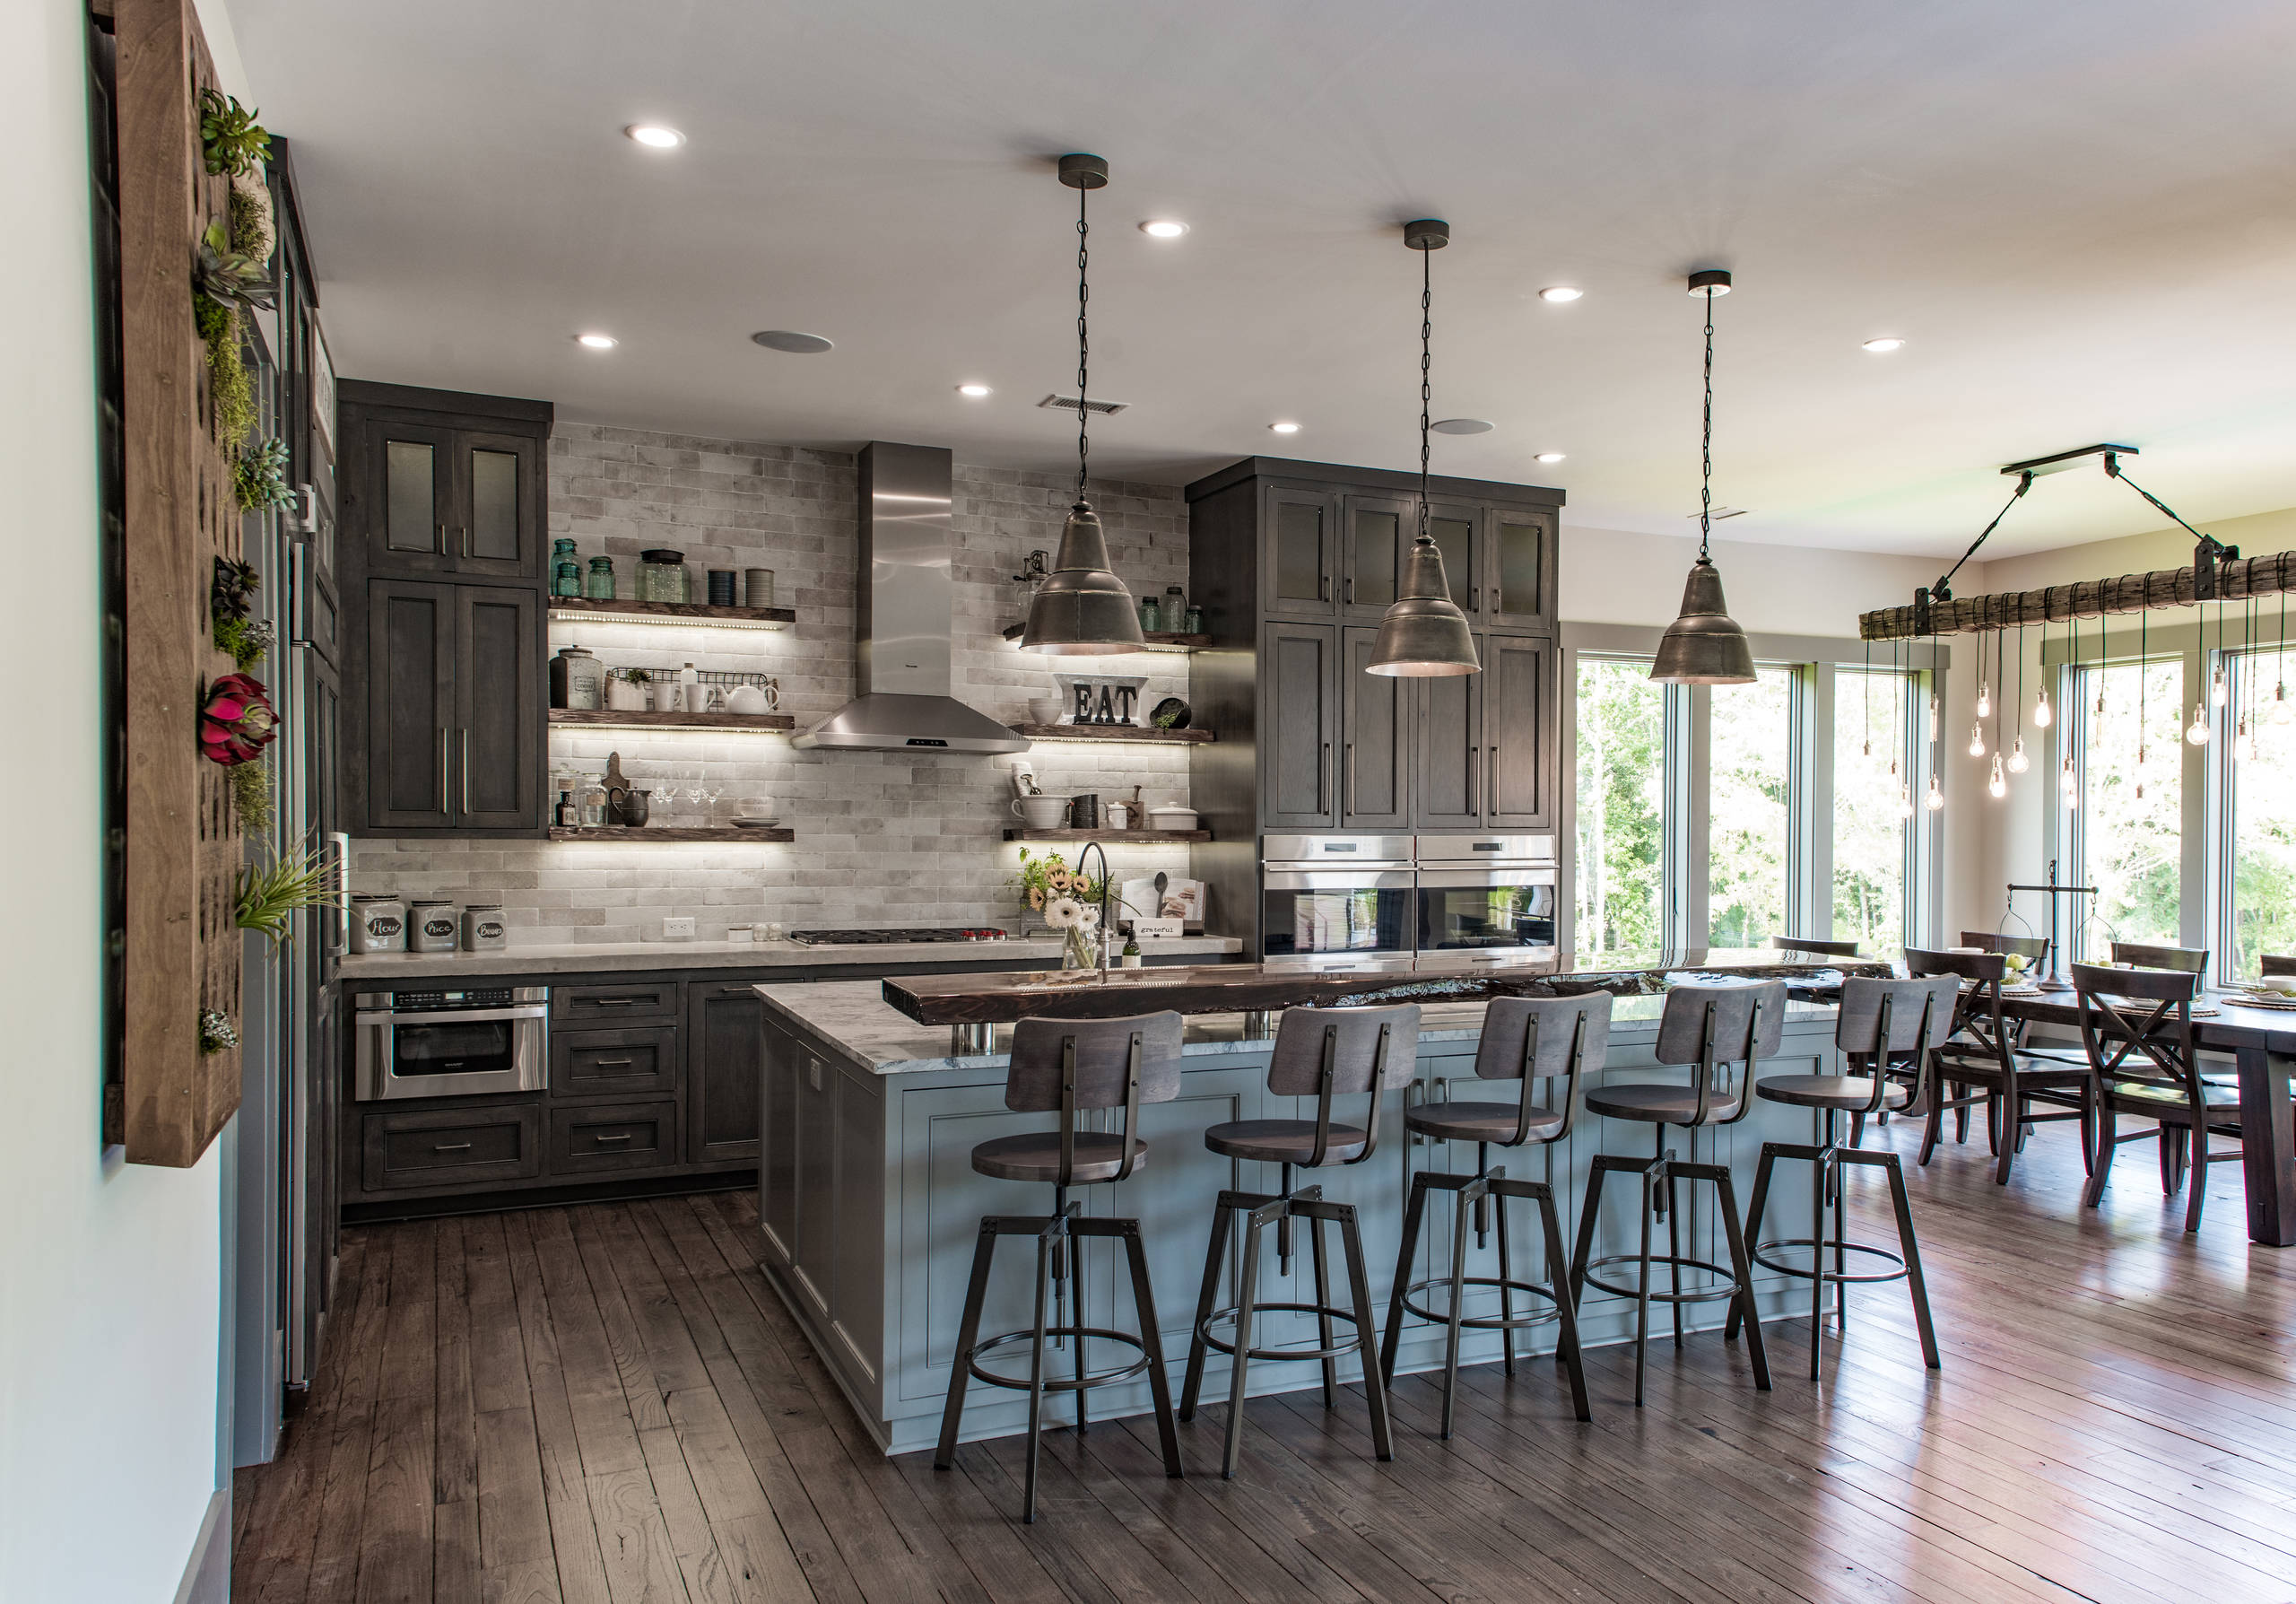 18 Beautiful Rustic Kitchen Pictures & Ideas   Houzz